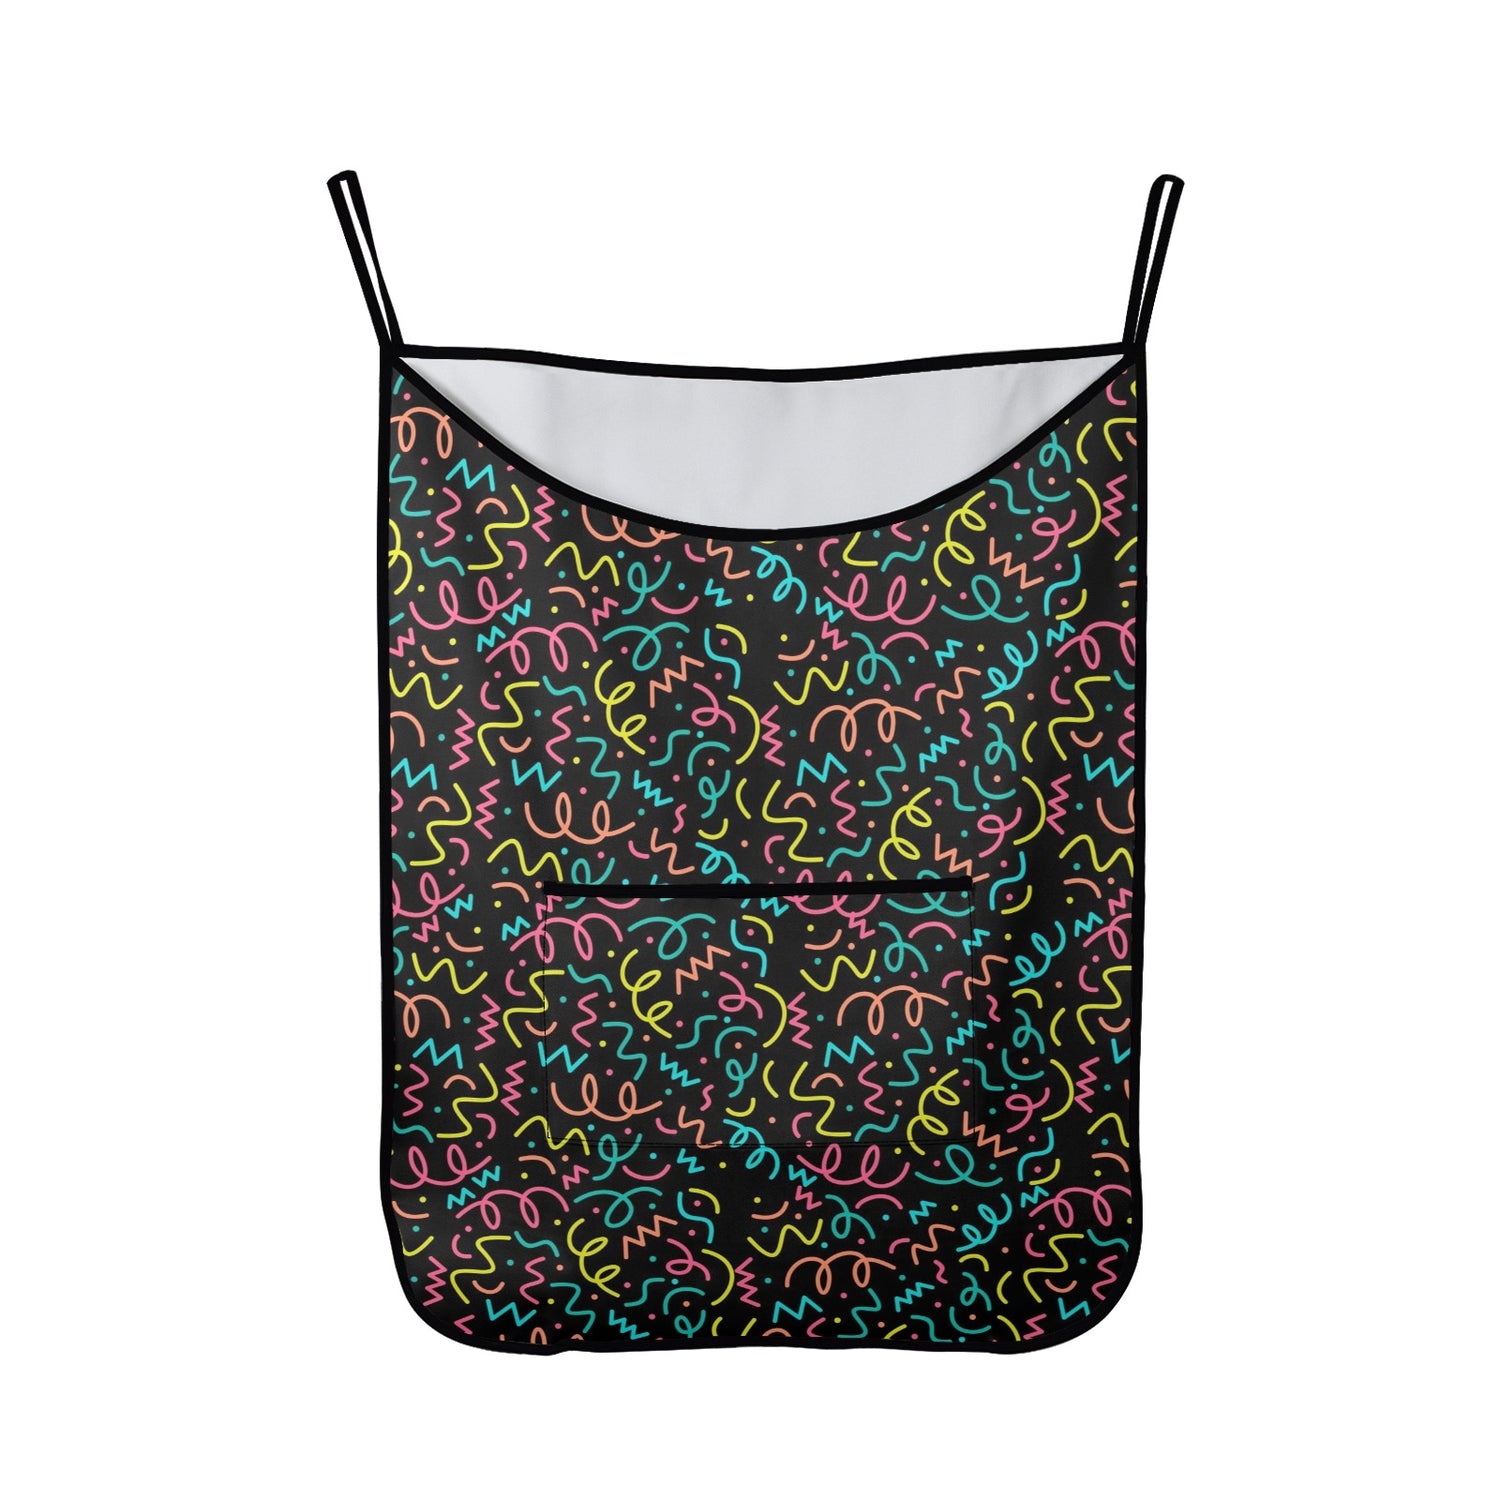 Squiggle Time - Hanging Laundry Bag Hanging Laundry Bag